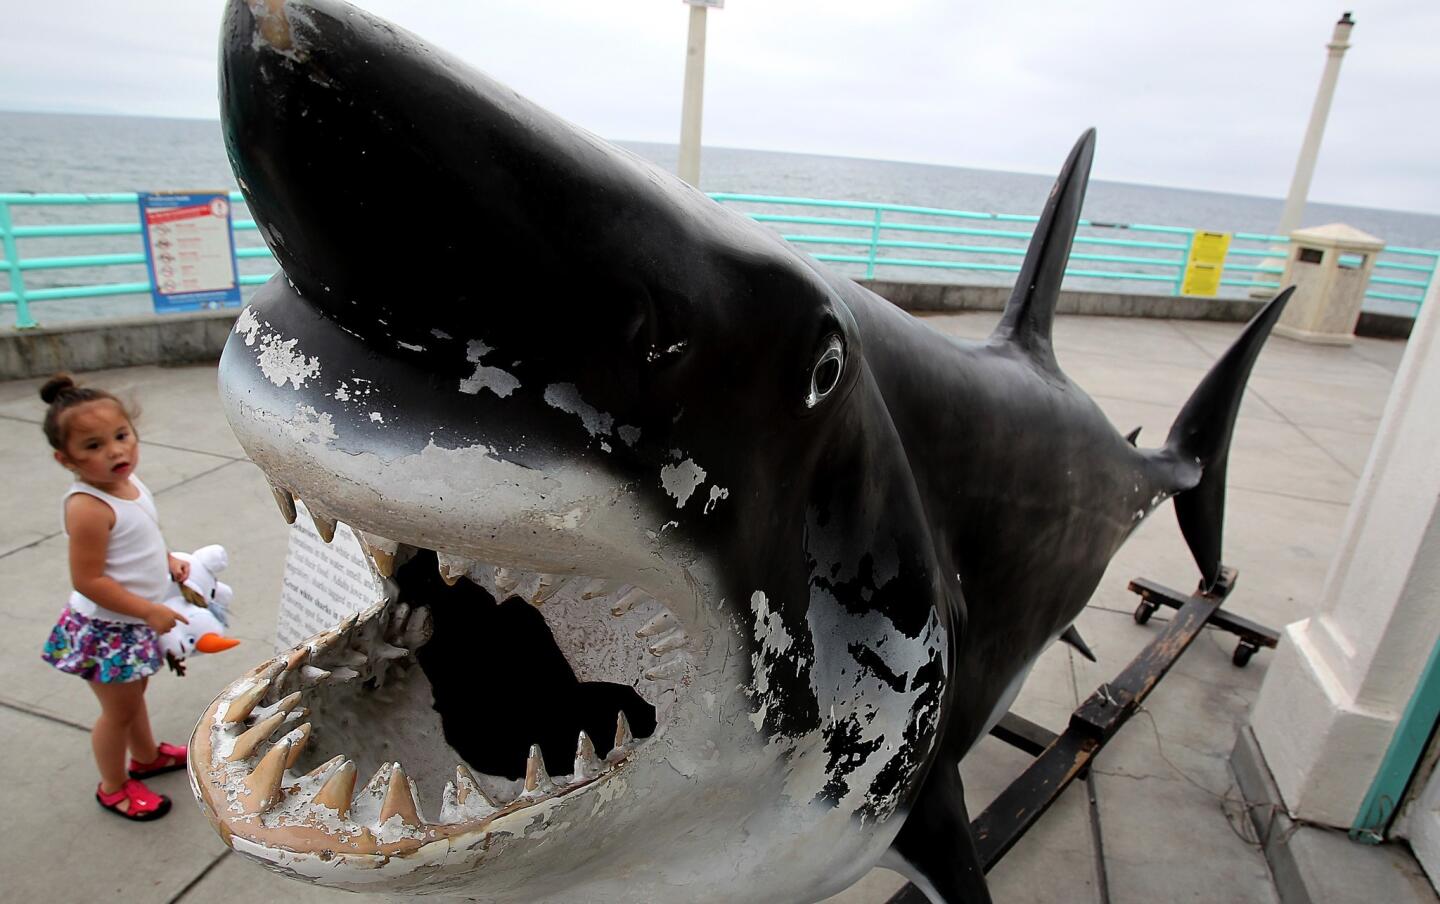 A child looks at a life-sized model of a great white shark outside the Roundhouse Aquarium on the Manhattan Beach Pier as the Manhattan Beach City Council prepared to hear arguments over banning fishing at the pier in the wake of a great white shark attack on a swimmer earlier in July.